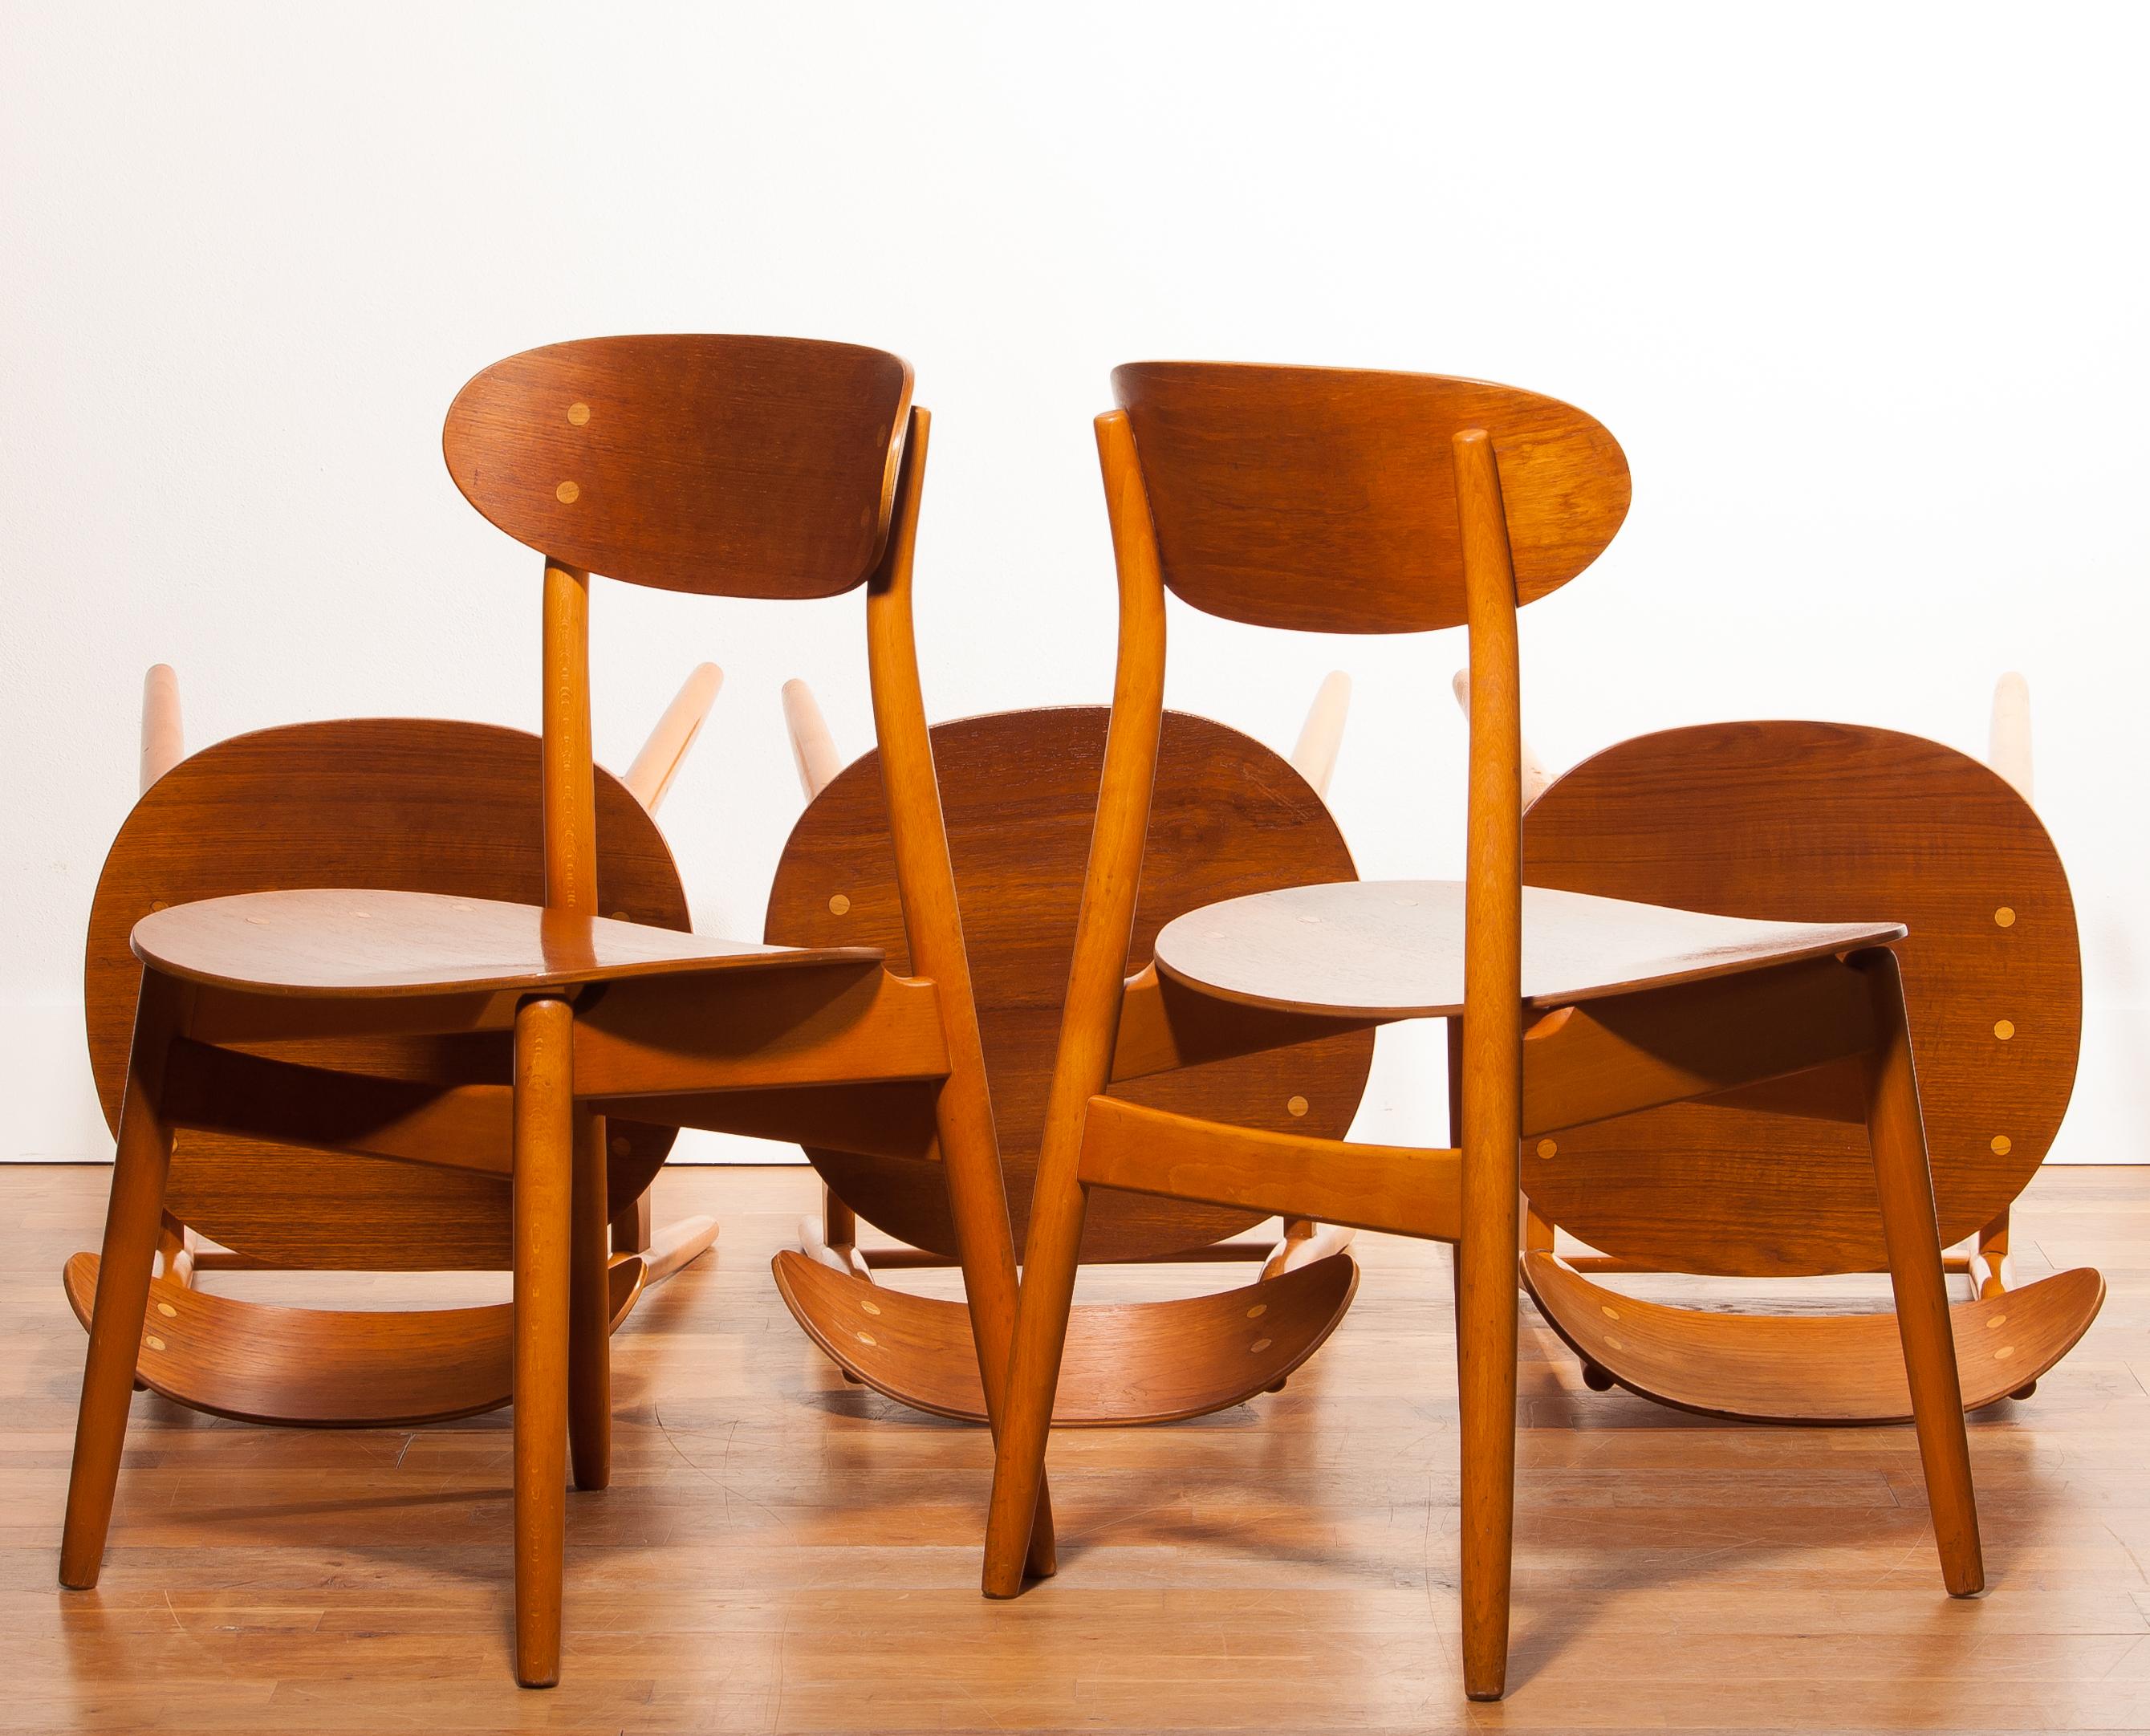 A very nice set of five dining chairs, model Eva, designed by Sven Erik Frylund for Hogafors Stolfabrik, Nässjö Denmark (marked)
The chairs are made of a teak seating and backrest on a beech frame.
They are in a beautiful condition.
Period